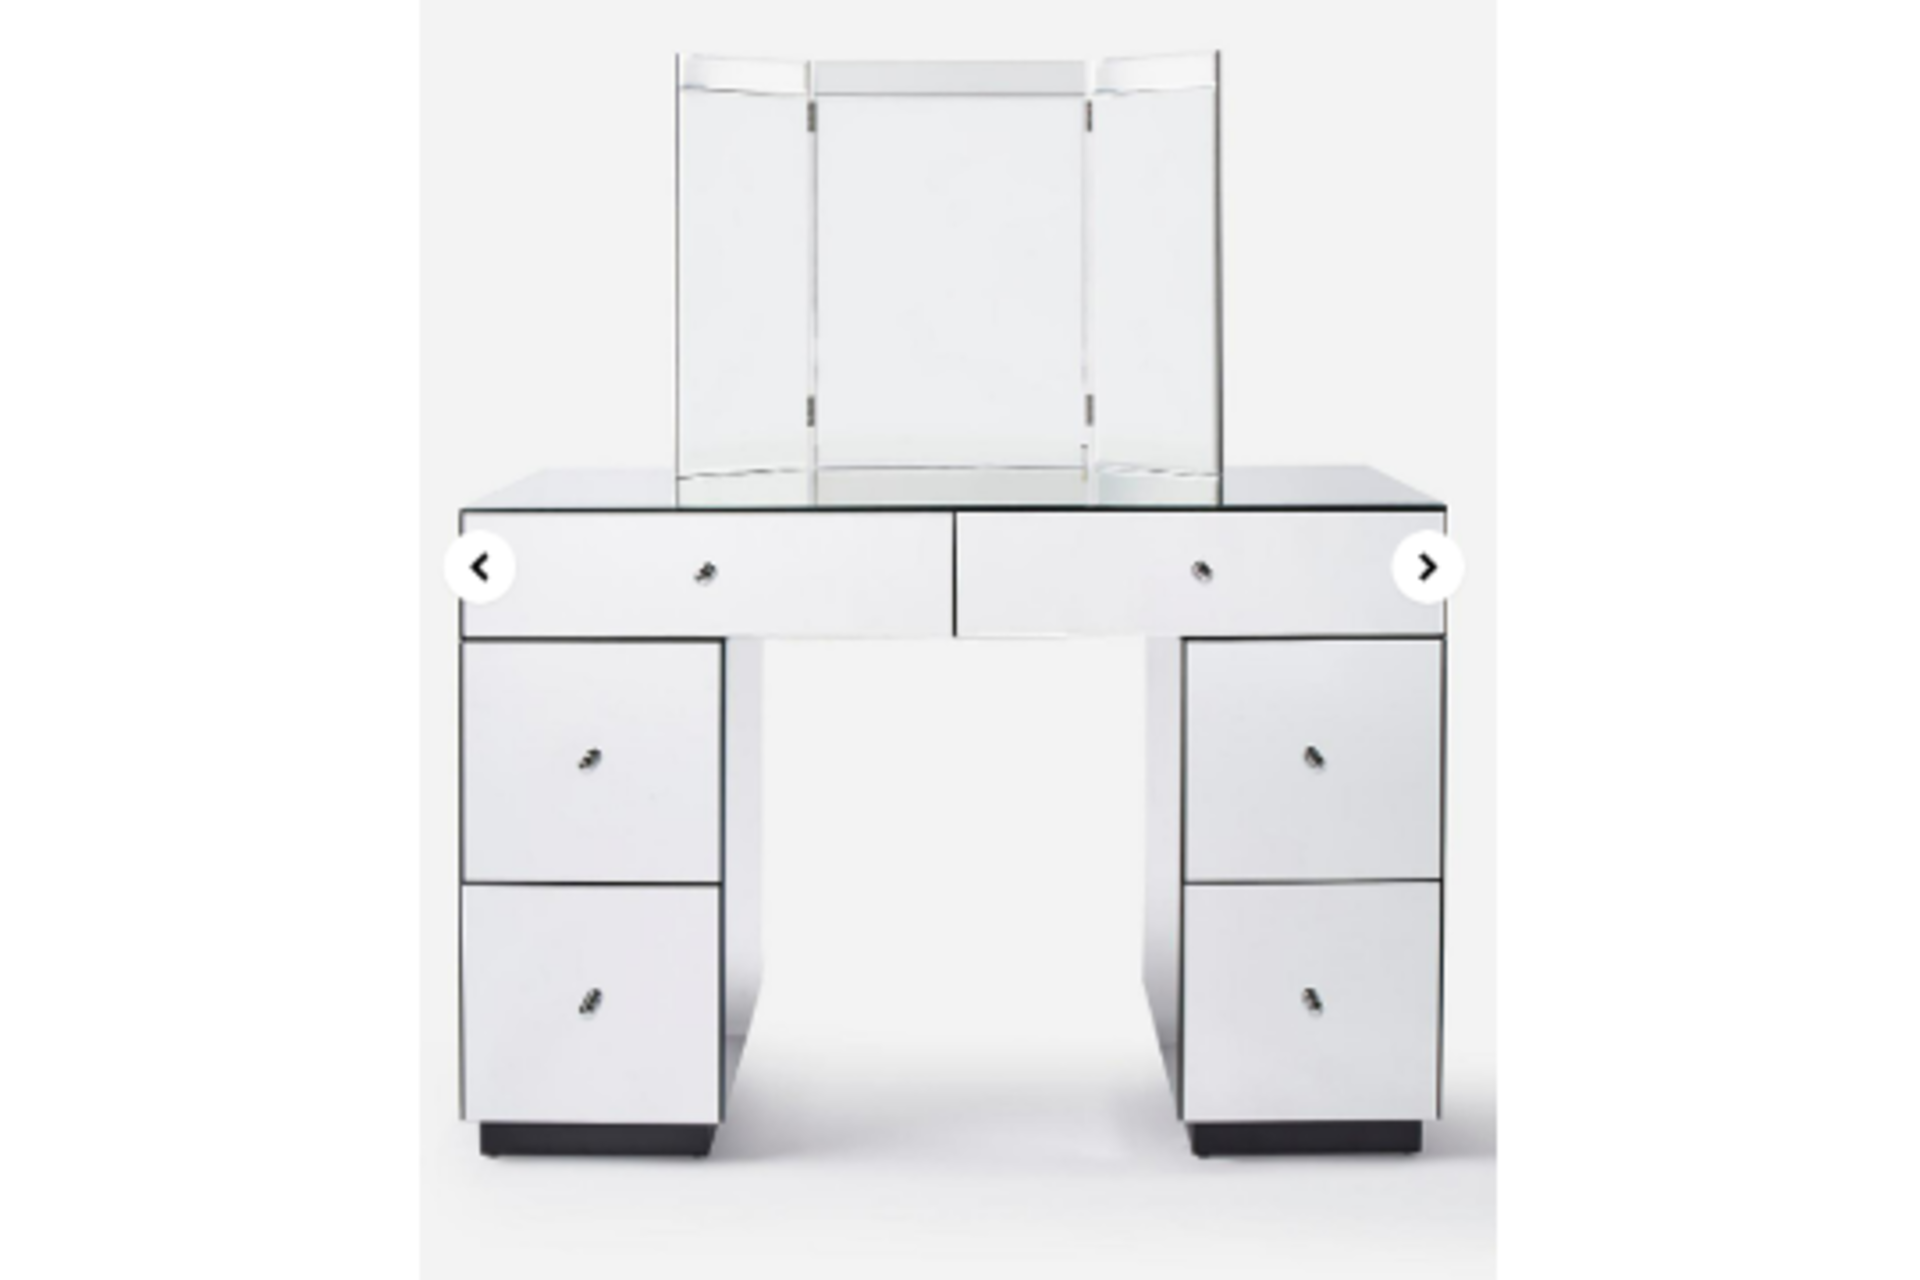 New & Boxed Luxury Deco Assembled Mirrored Dressing Table. RRP £599. The Mirage Mirrored Dressing